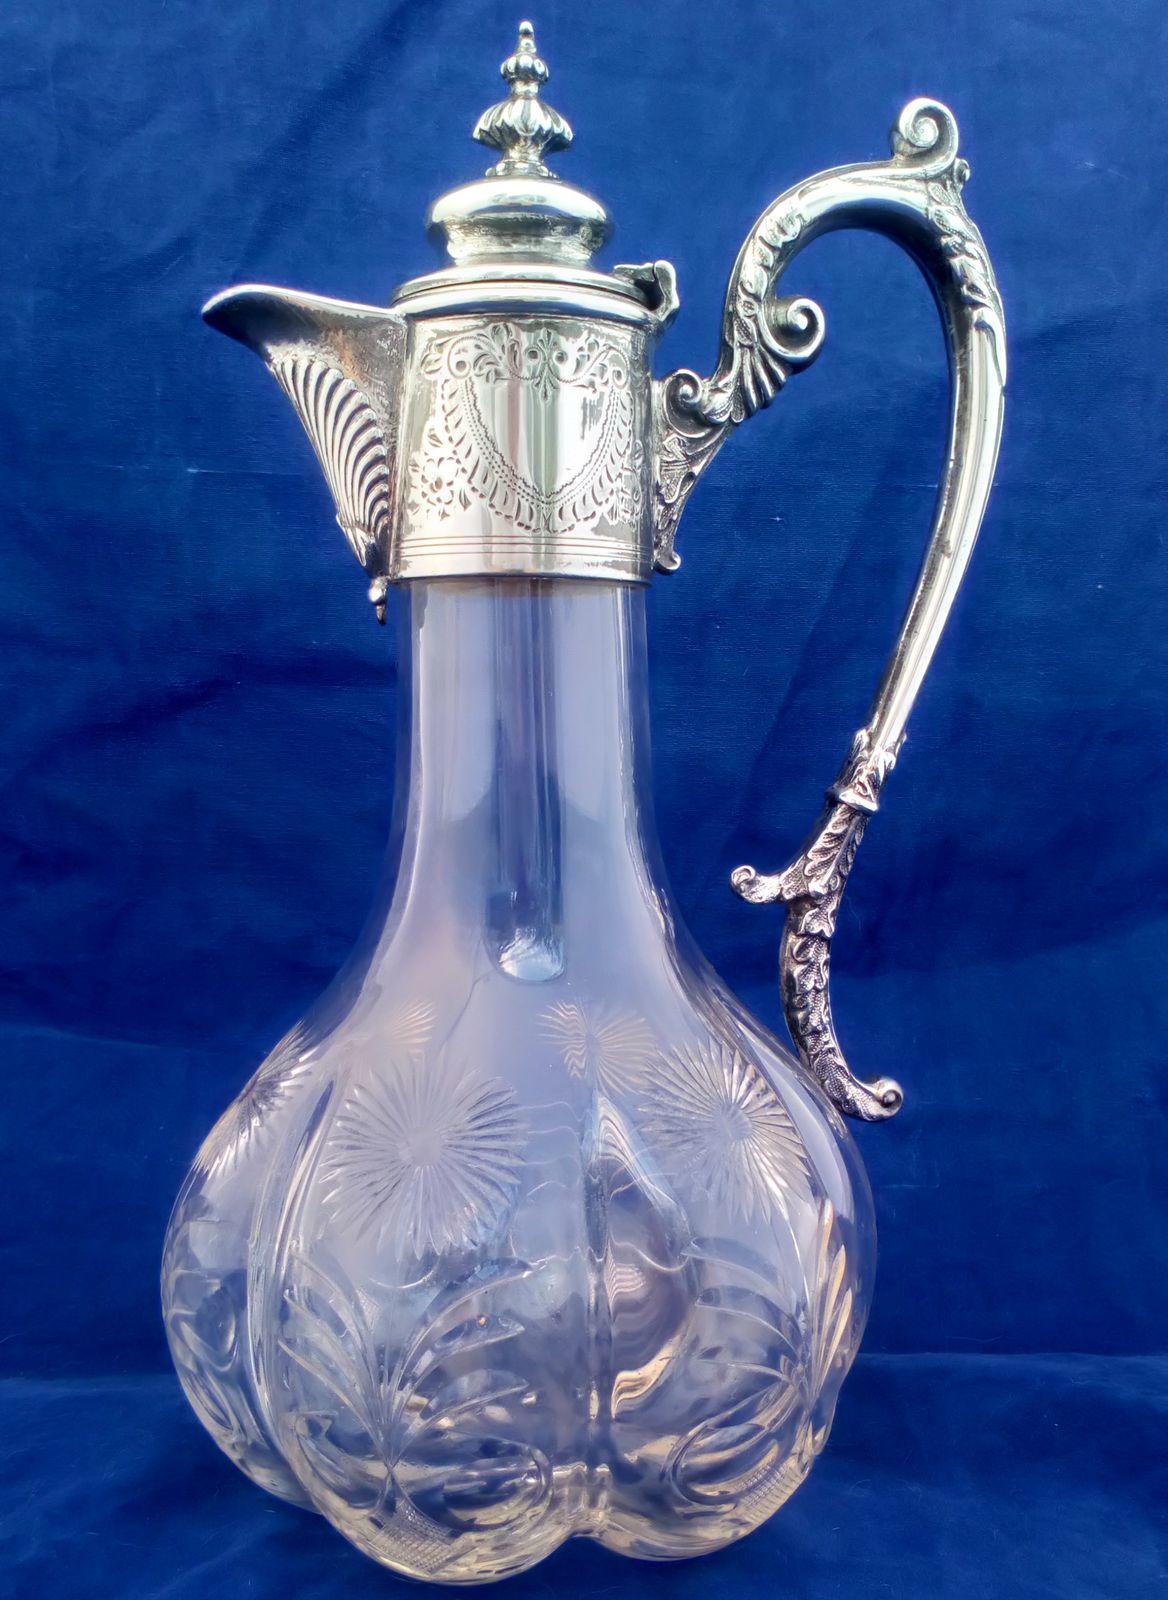 A very attractive antique Aesthetic Movement silver plated mounted cut glass lobed claret jug decorated with cut stylised daisies circa 1870.